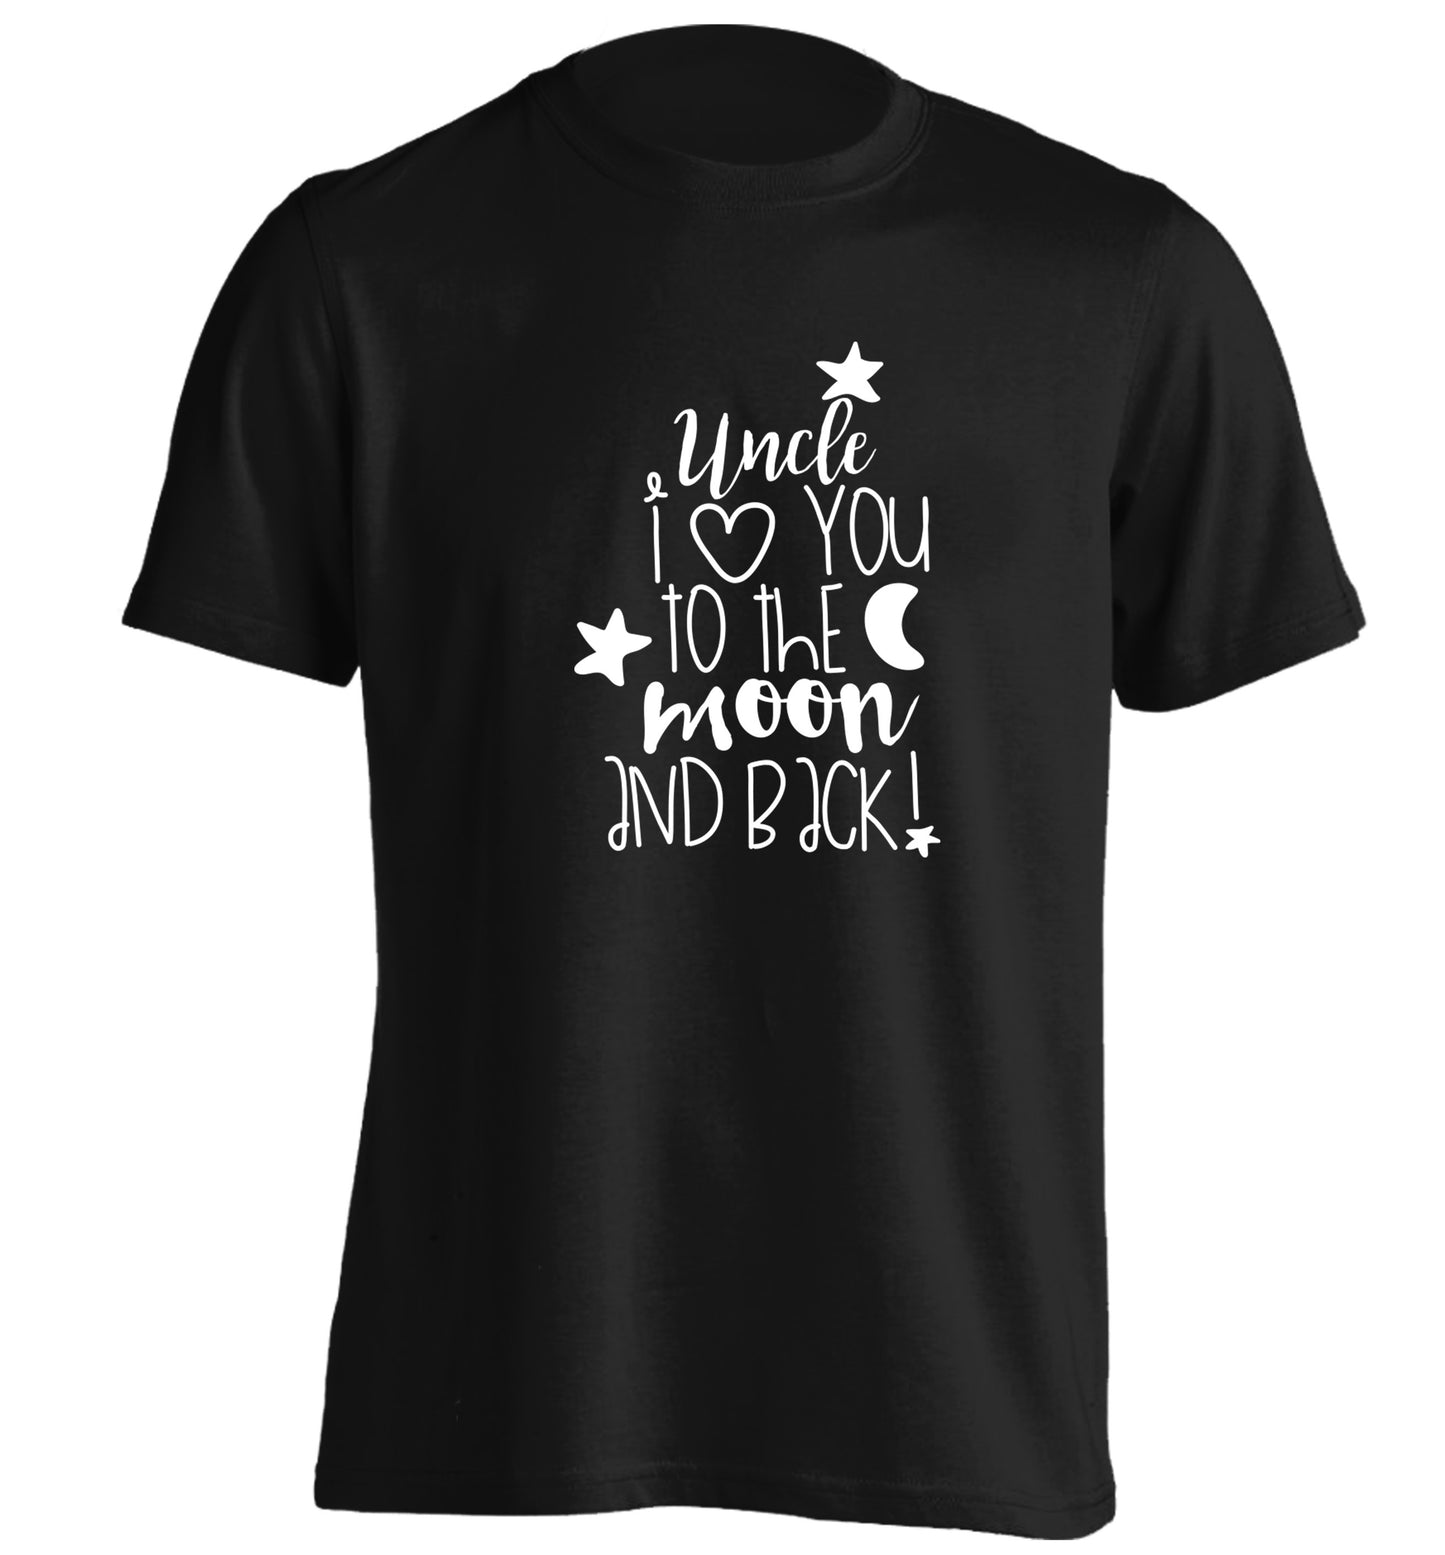 Uncle I love you to the moon and back adults unisex black Tshirt 2XL